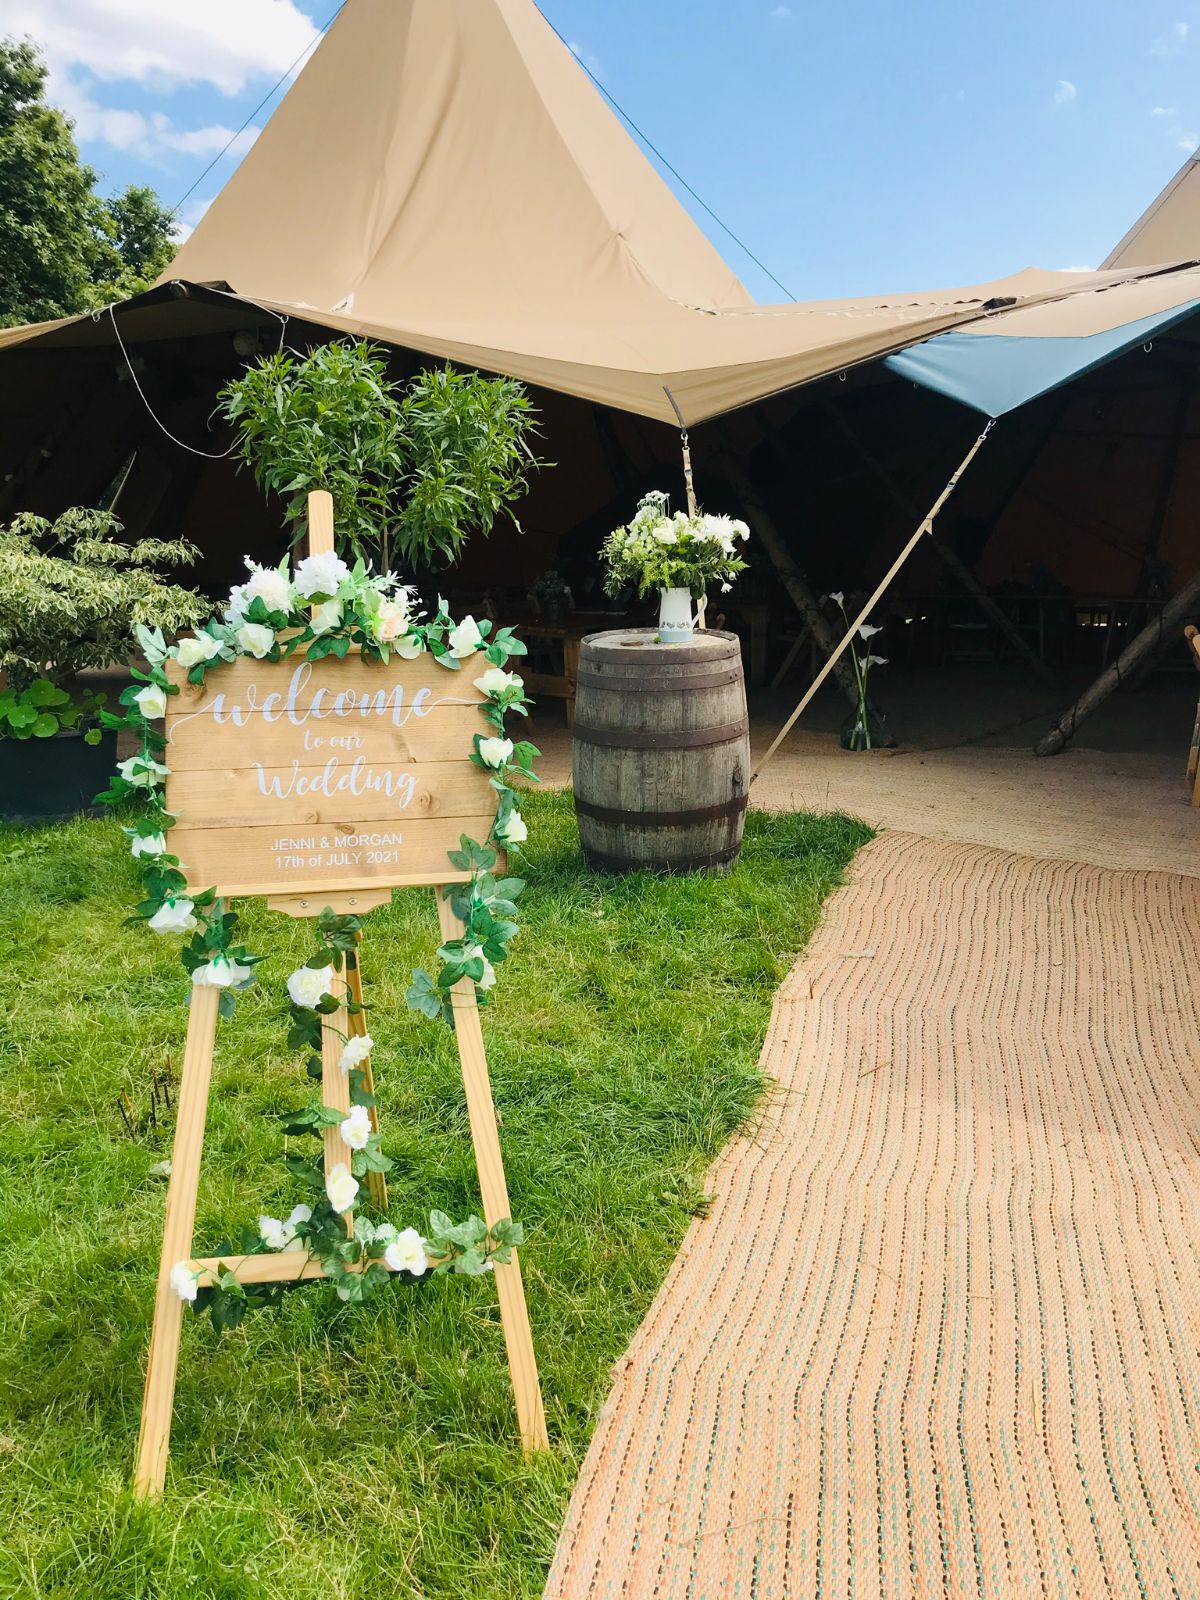 Gallery Item 109 for Event In A Tent